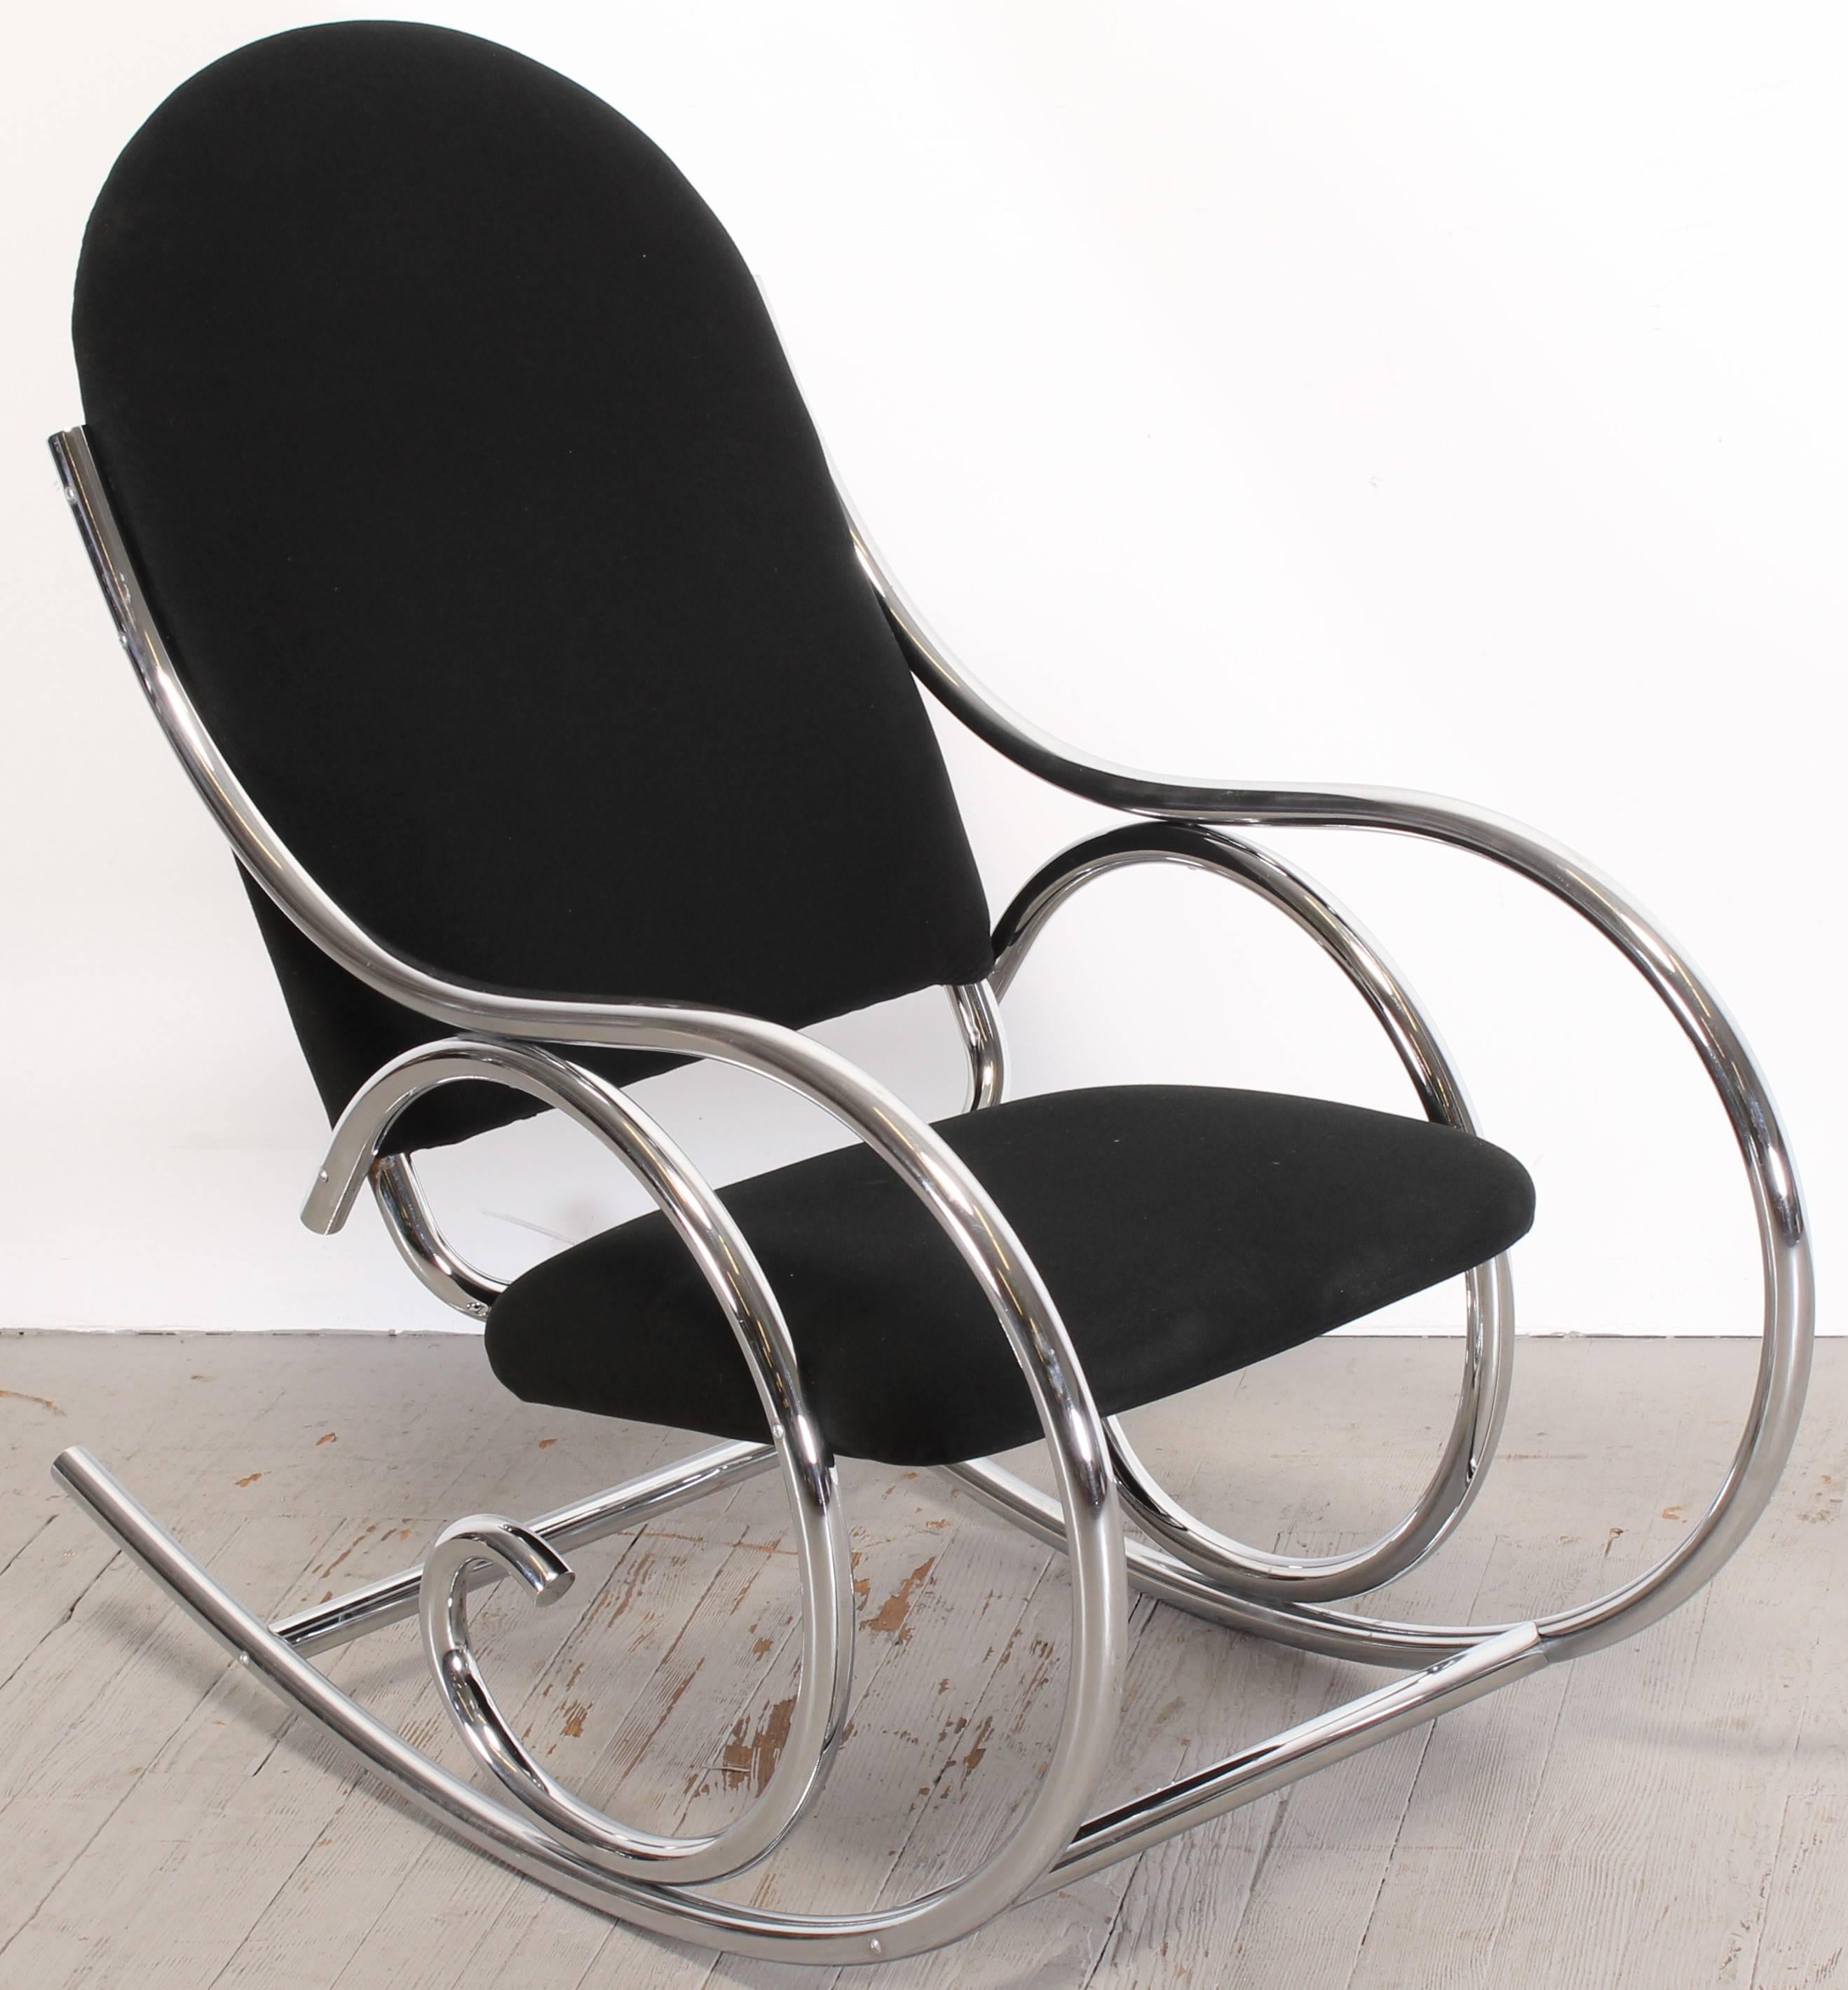 Italian chrome rocking chair, probably upholstered and sold by Selig Manufacturing Co, retains original upholstery tag with license number that has been found on marked Selig pieces. There are similar chairs, it is obvious that this is a higher